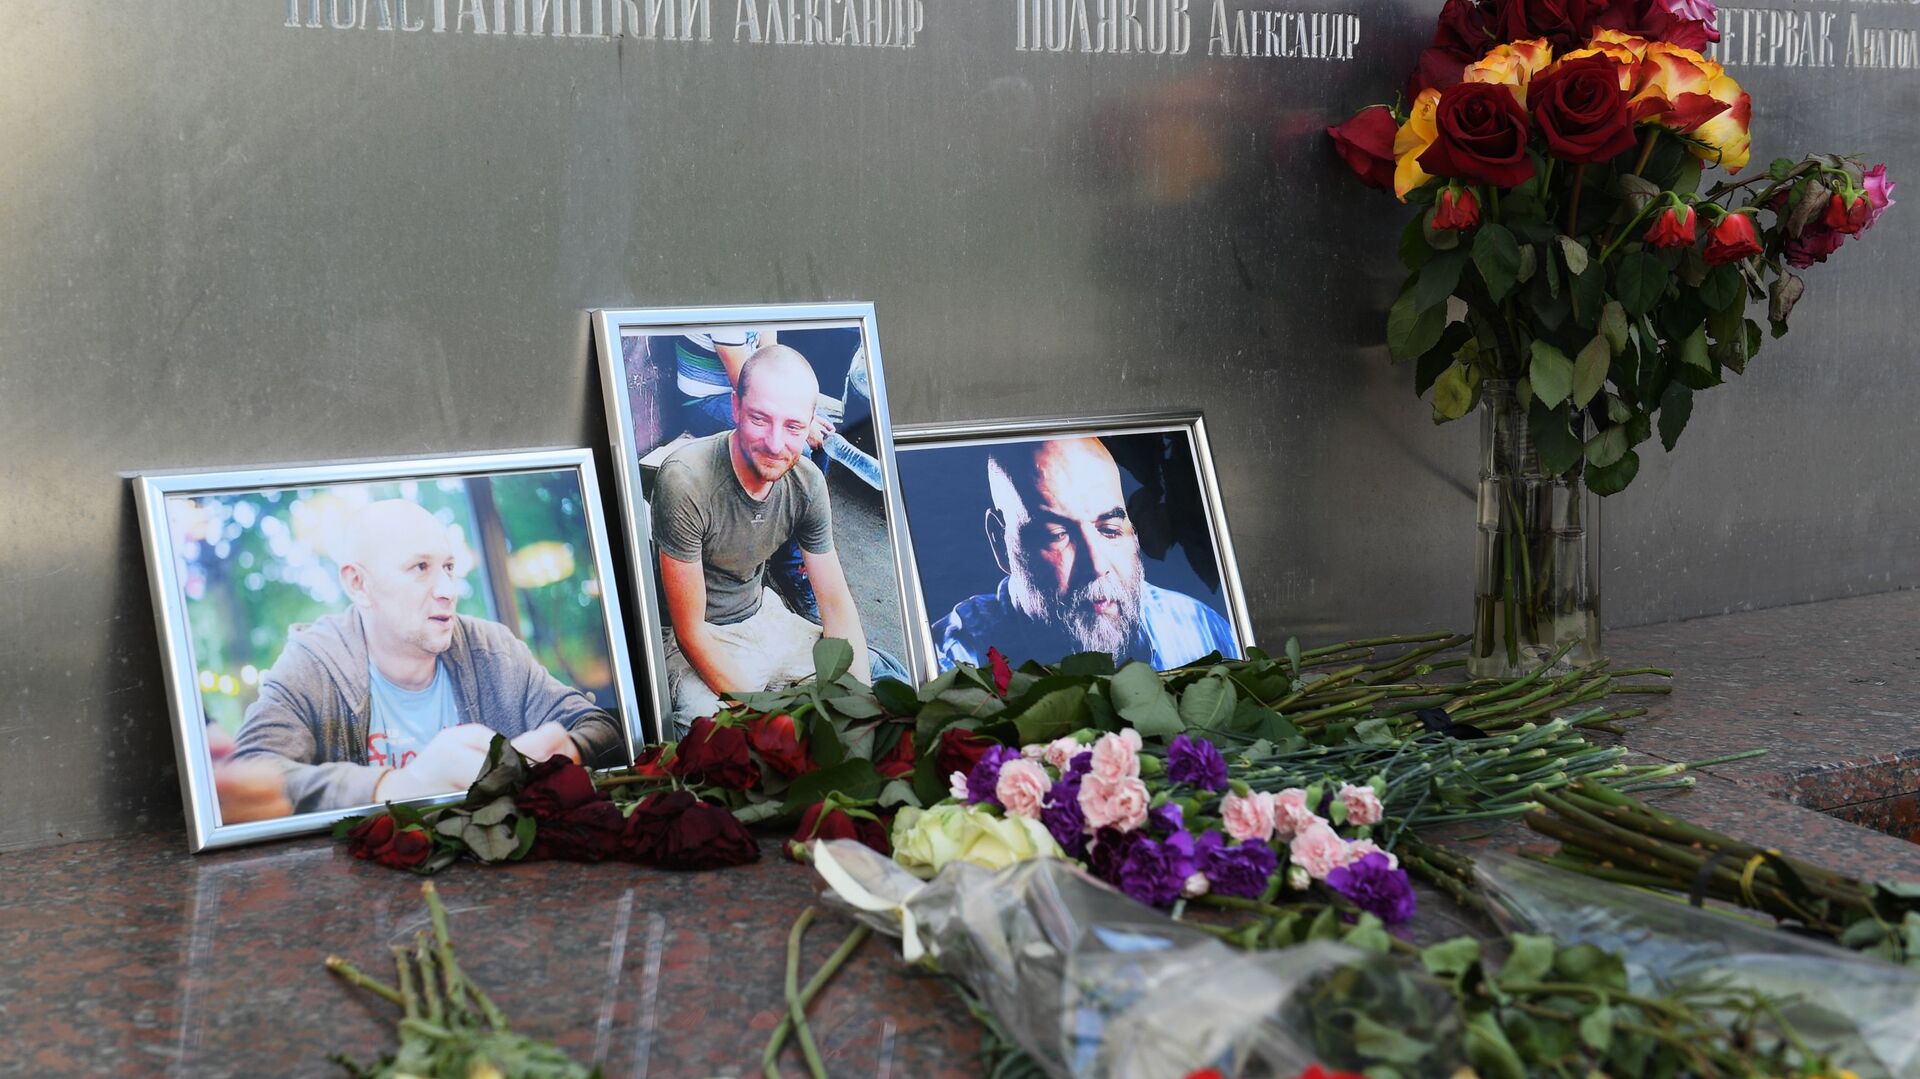 Flowers and Pictures of Russian Journalists Killed in 2018 in CAR - Sputnik International, 1920, 20.01.2022